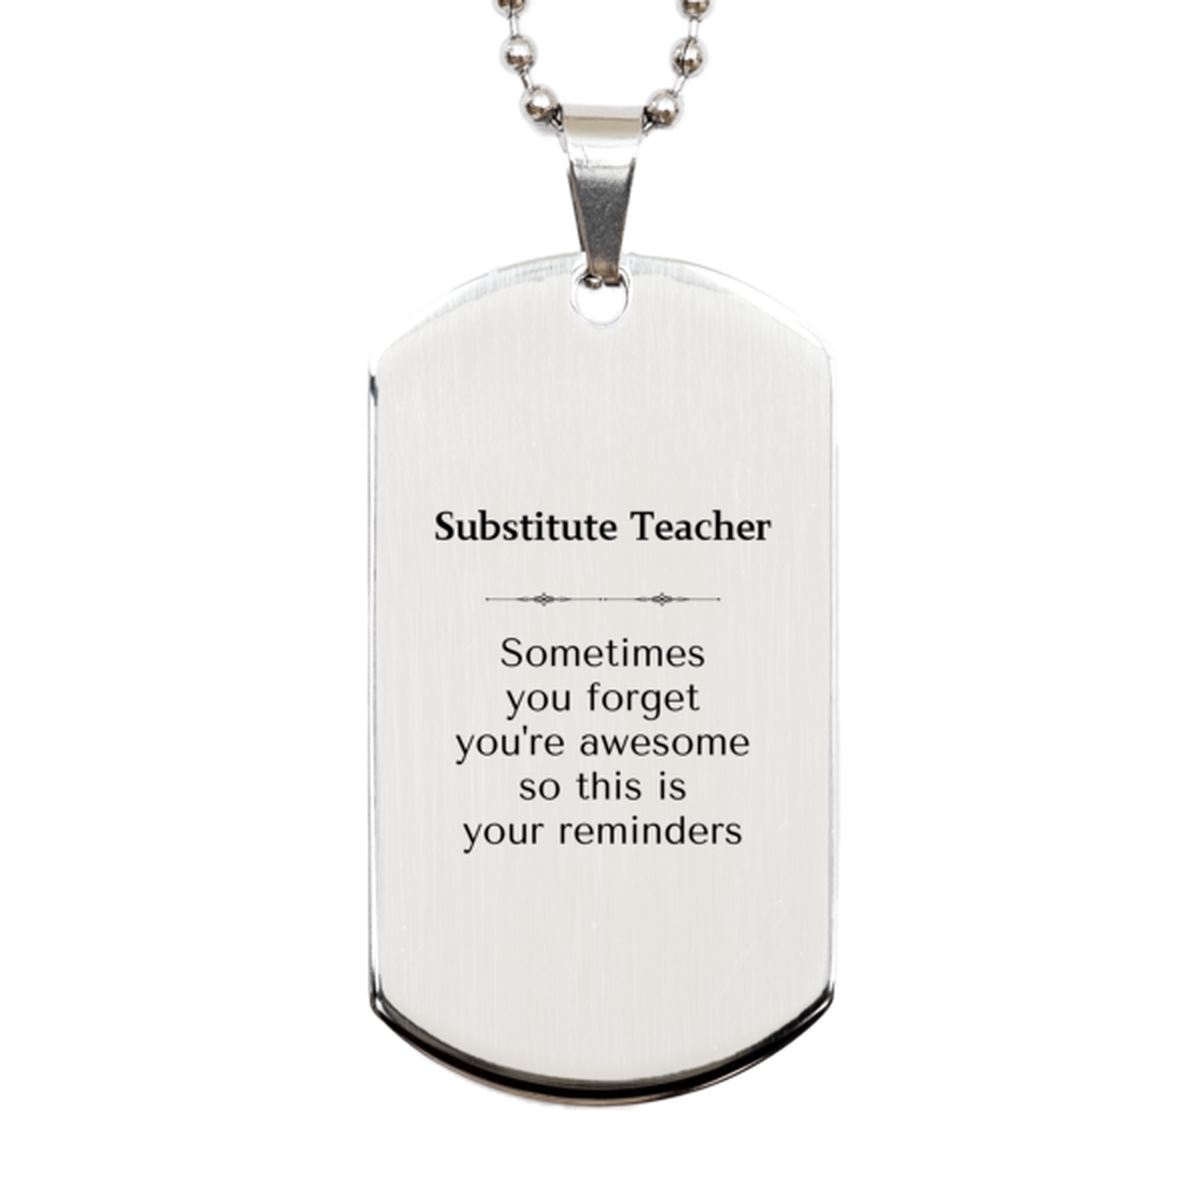 Sentimental Substitute Teacher Silver Dog Tag, Substitute Teacher Sometimes you forget you're awesome so this is your reminders, Graduation Christmas Birthday Gifts for Substitute Teacher, Men, Women, Coworkers